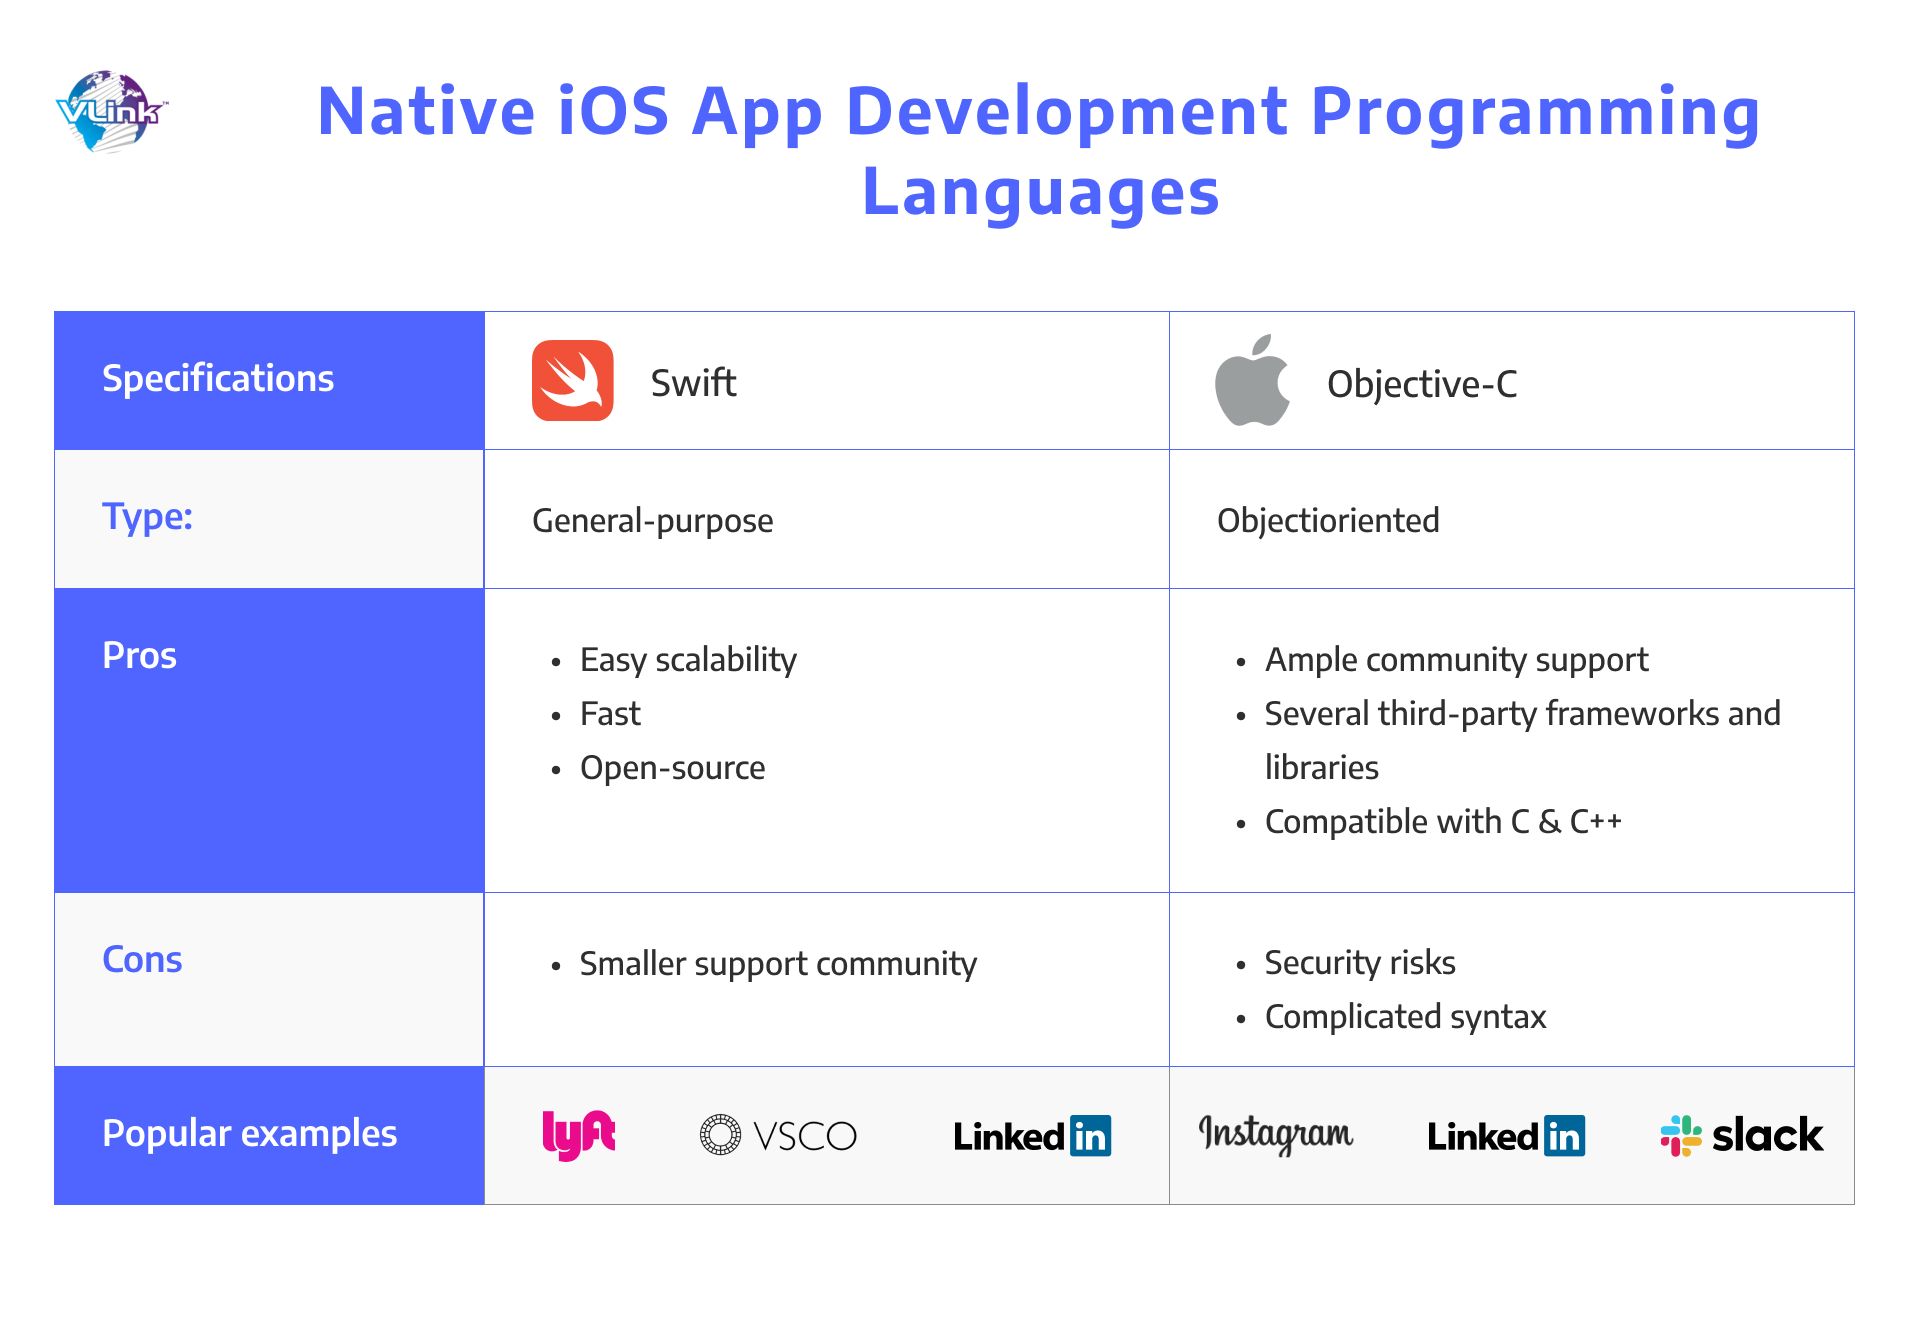 Native Apps